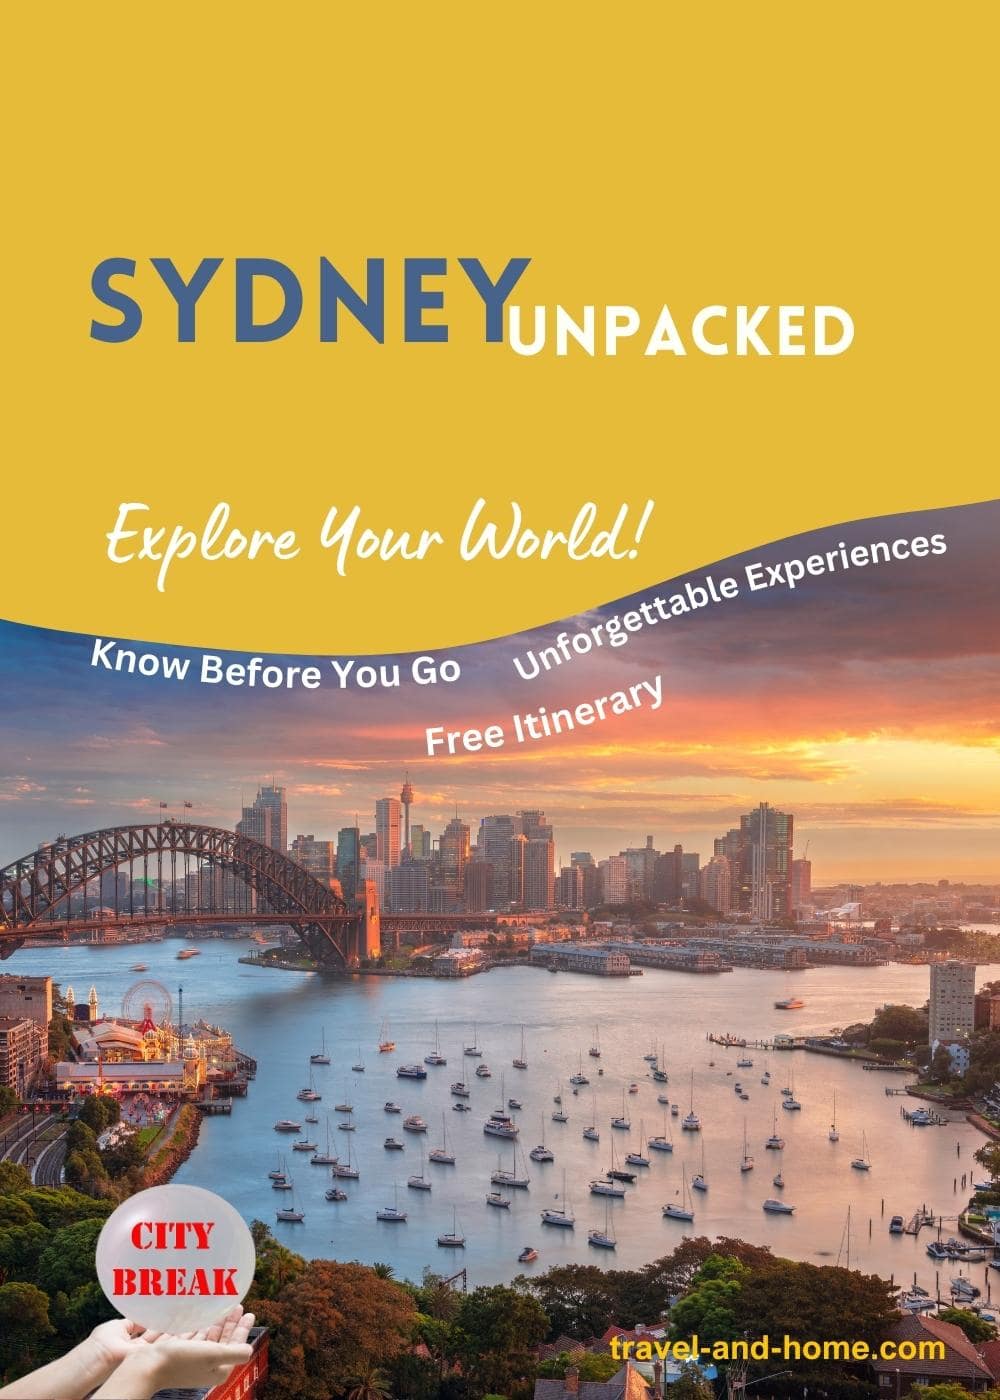 Sydney travel guide, must see and do, nature and adventure, Natural wonders, unesco sites, tour, get your guide, best cityscape holidays min